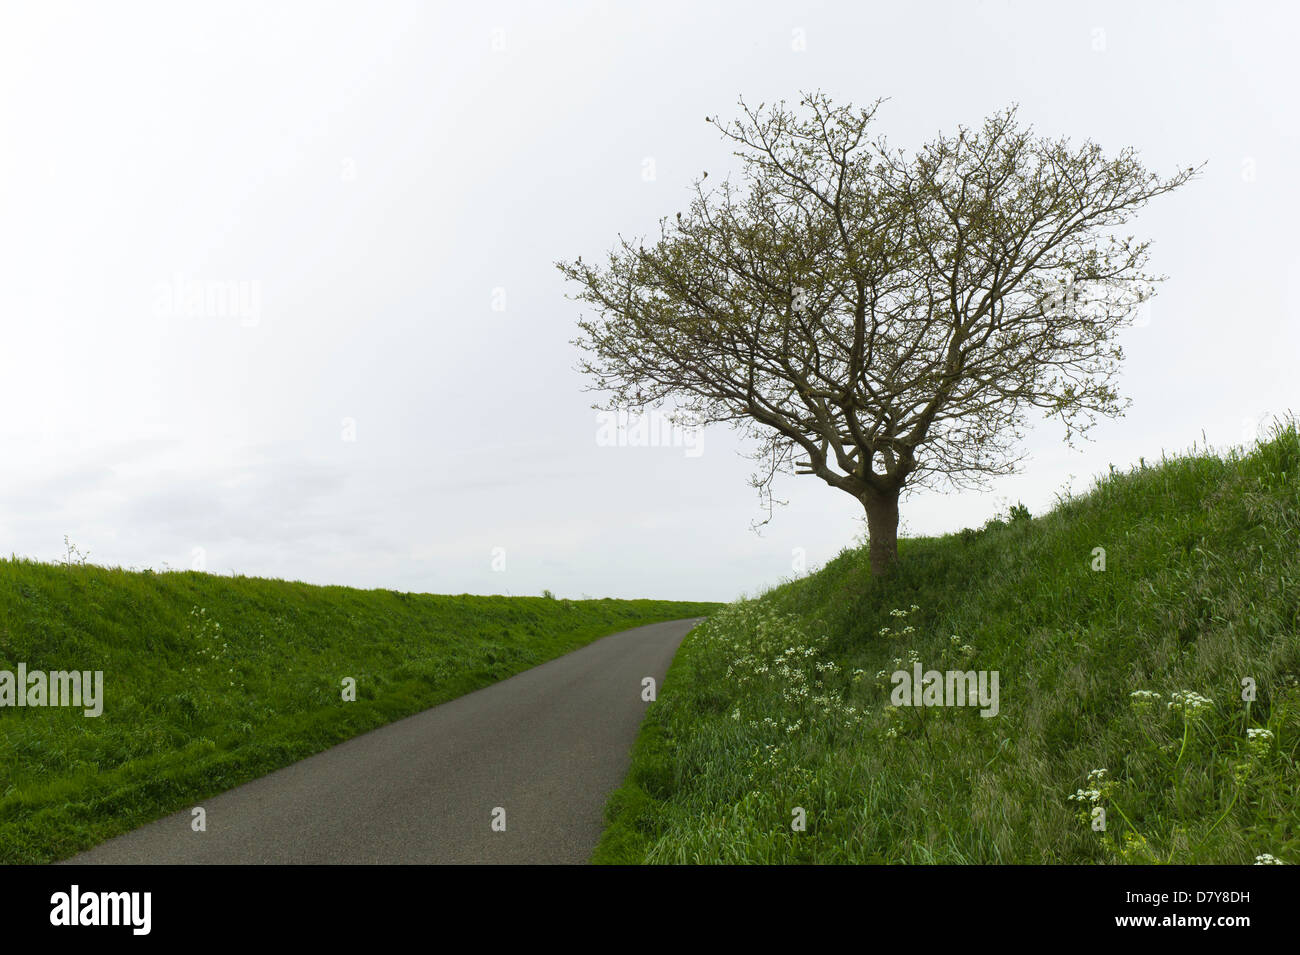 Country road through grassy banks and tree, Normandy, France Stock Photo